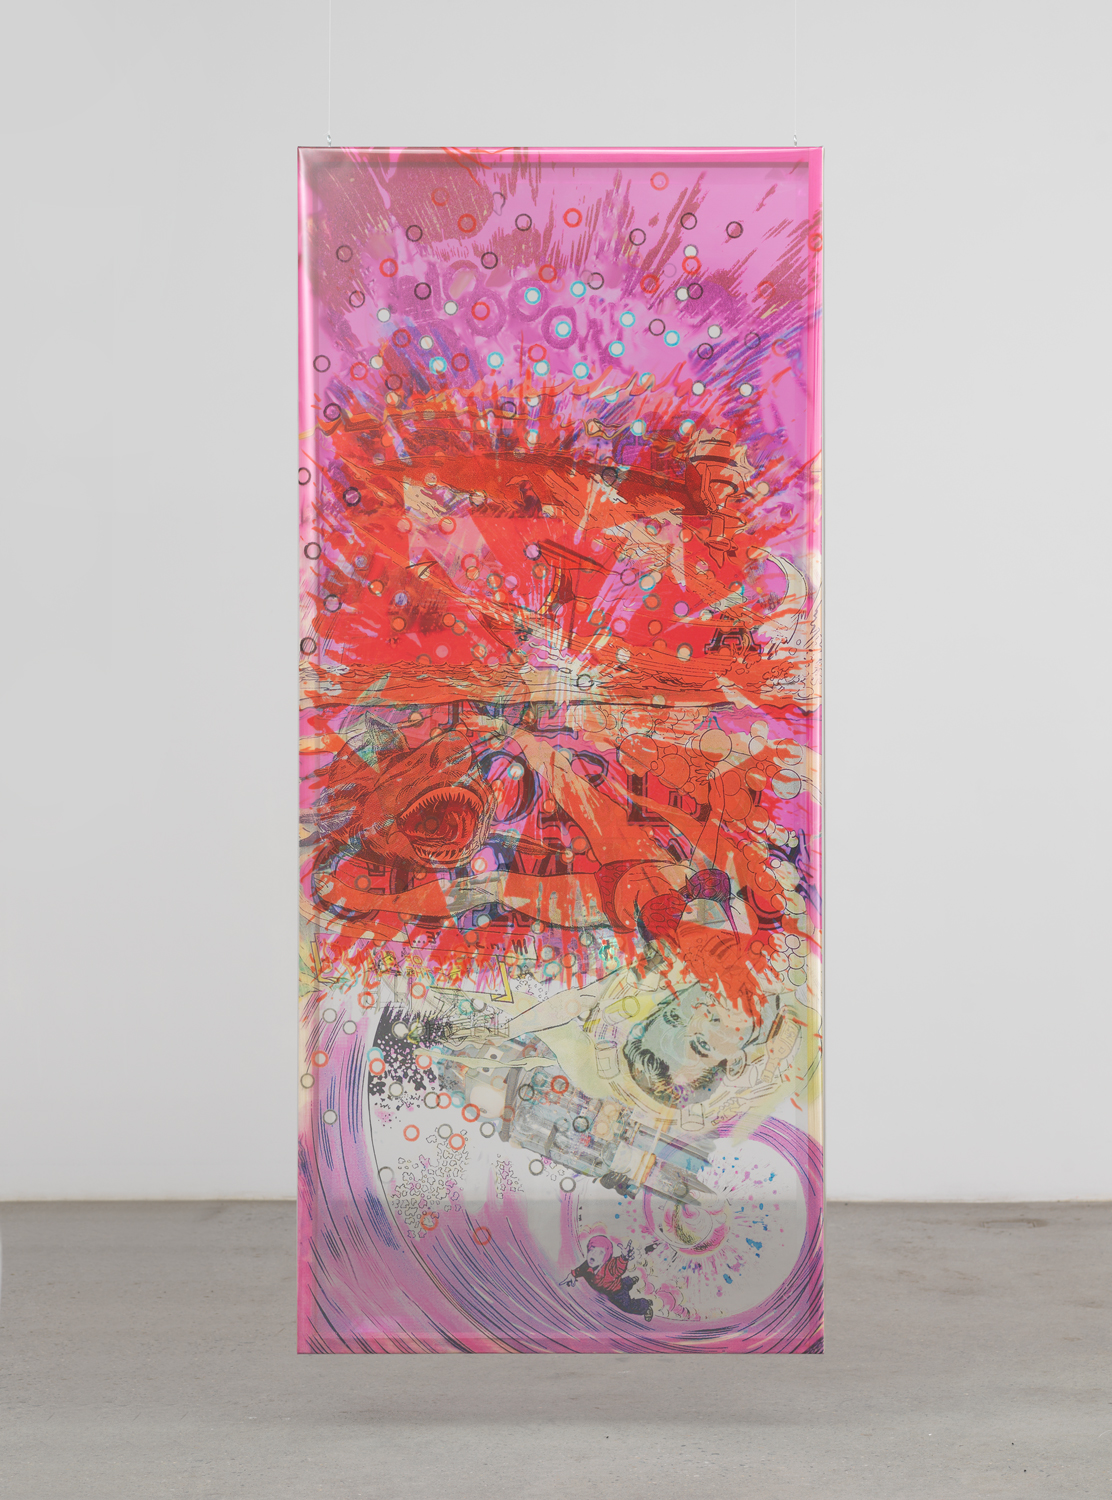 Jibade-Khalil Huffman, Untitled (Explosion), 2020, Inkjet on transparencies, looping video, 60.25h x 27.13w x 1.50d in.